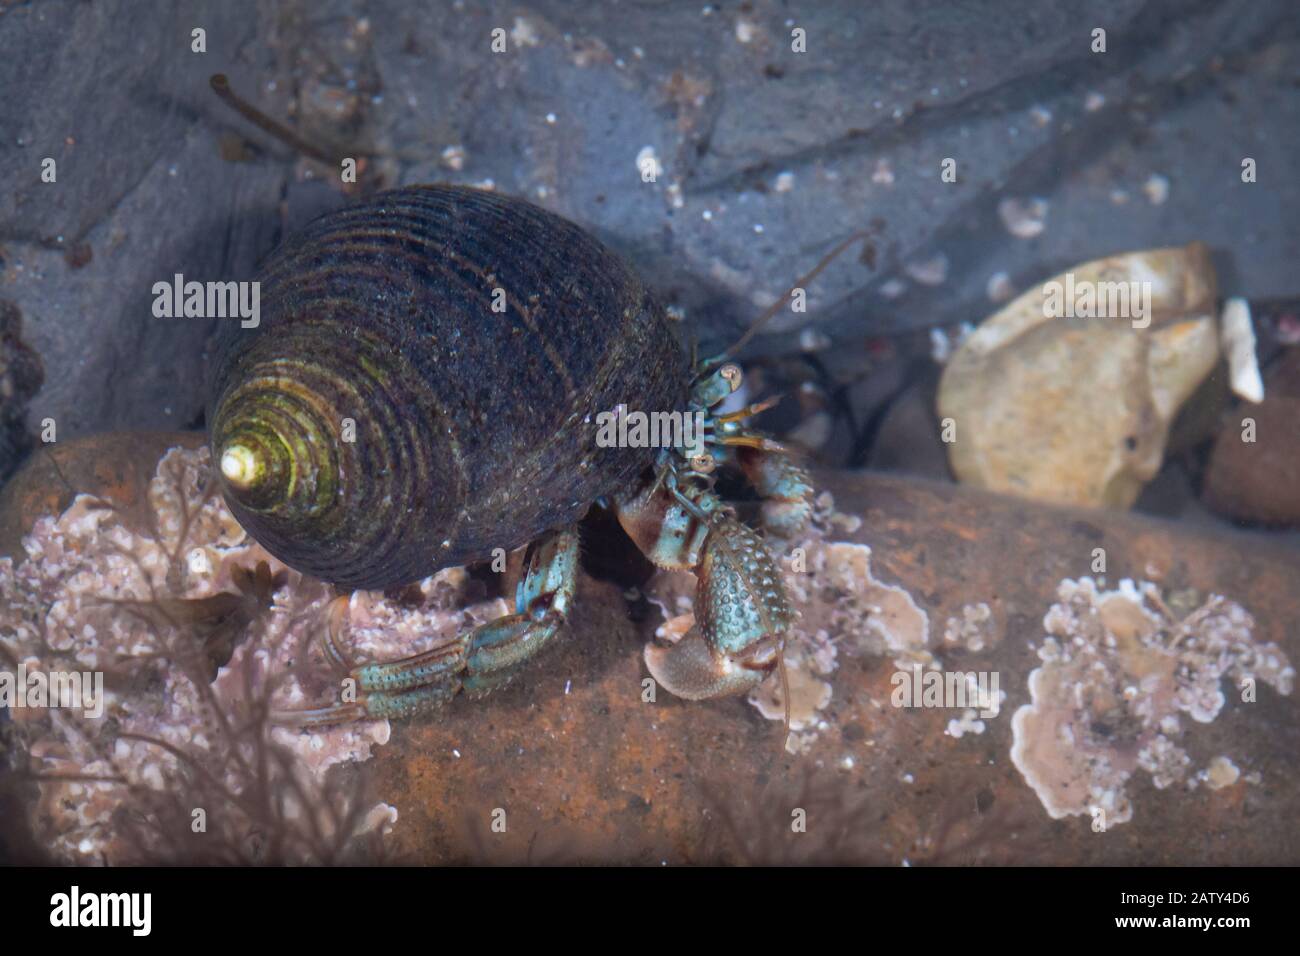 The blue and orange hermit crab (Pagurus bernhardus) displays its dog whelk shell as it walks through the rock pool on the Yorkshire Coast Stock Photo